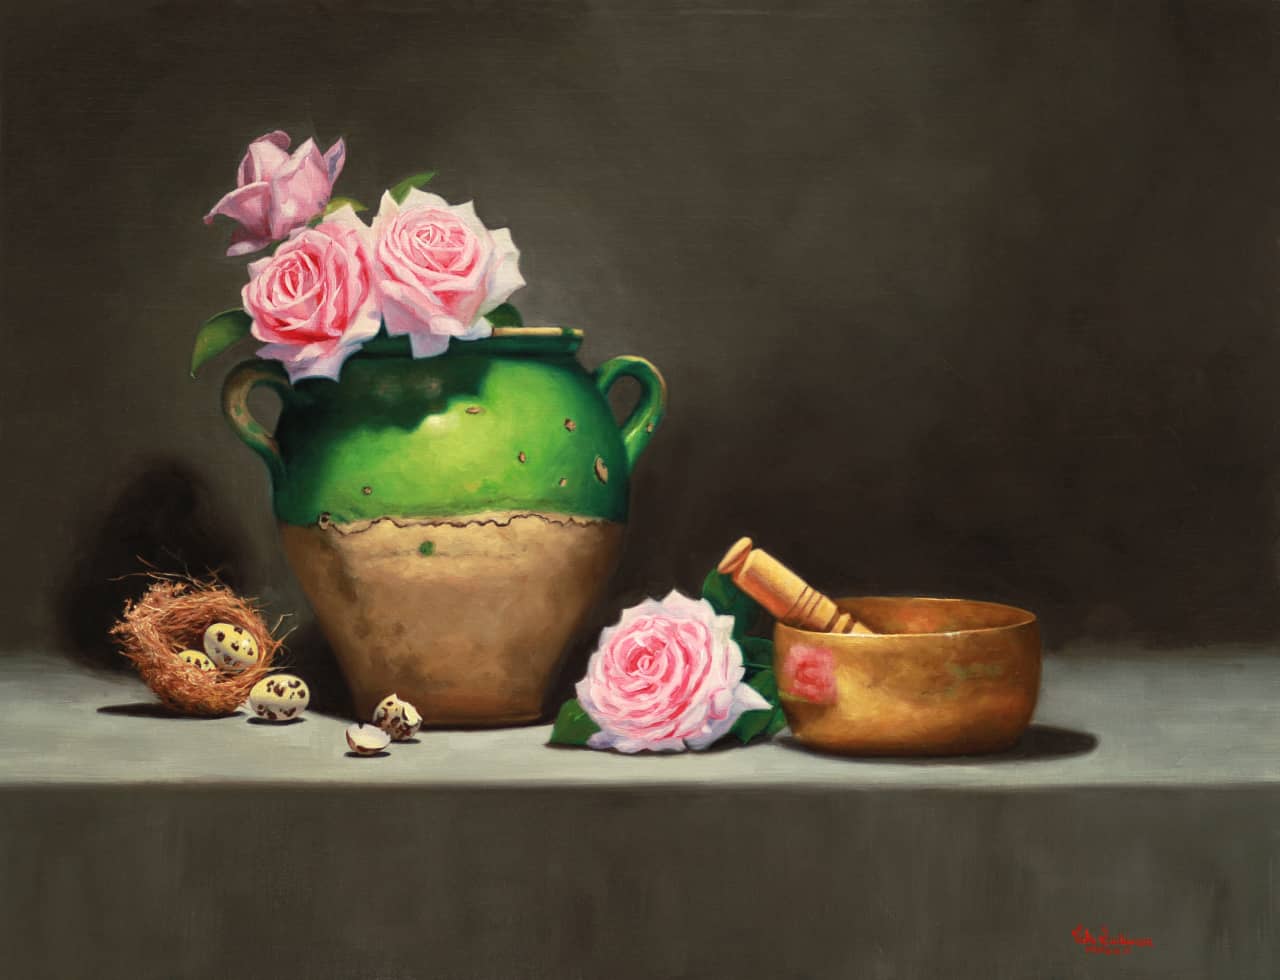 Vicki Sullivan Painting ~ 'Green French Pot with Roses' - Curate Art & Design Gallery Sorrento Mornington Peninsula Melbourne